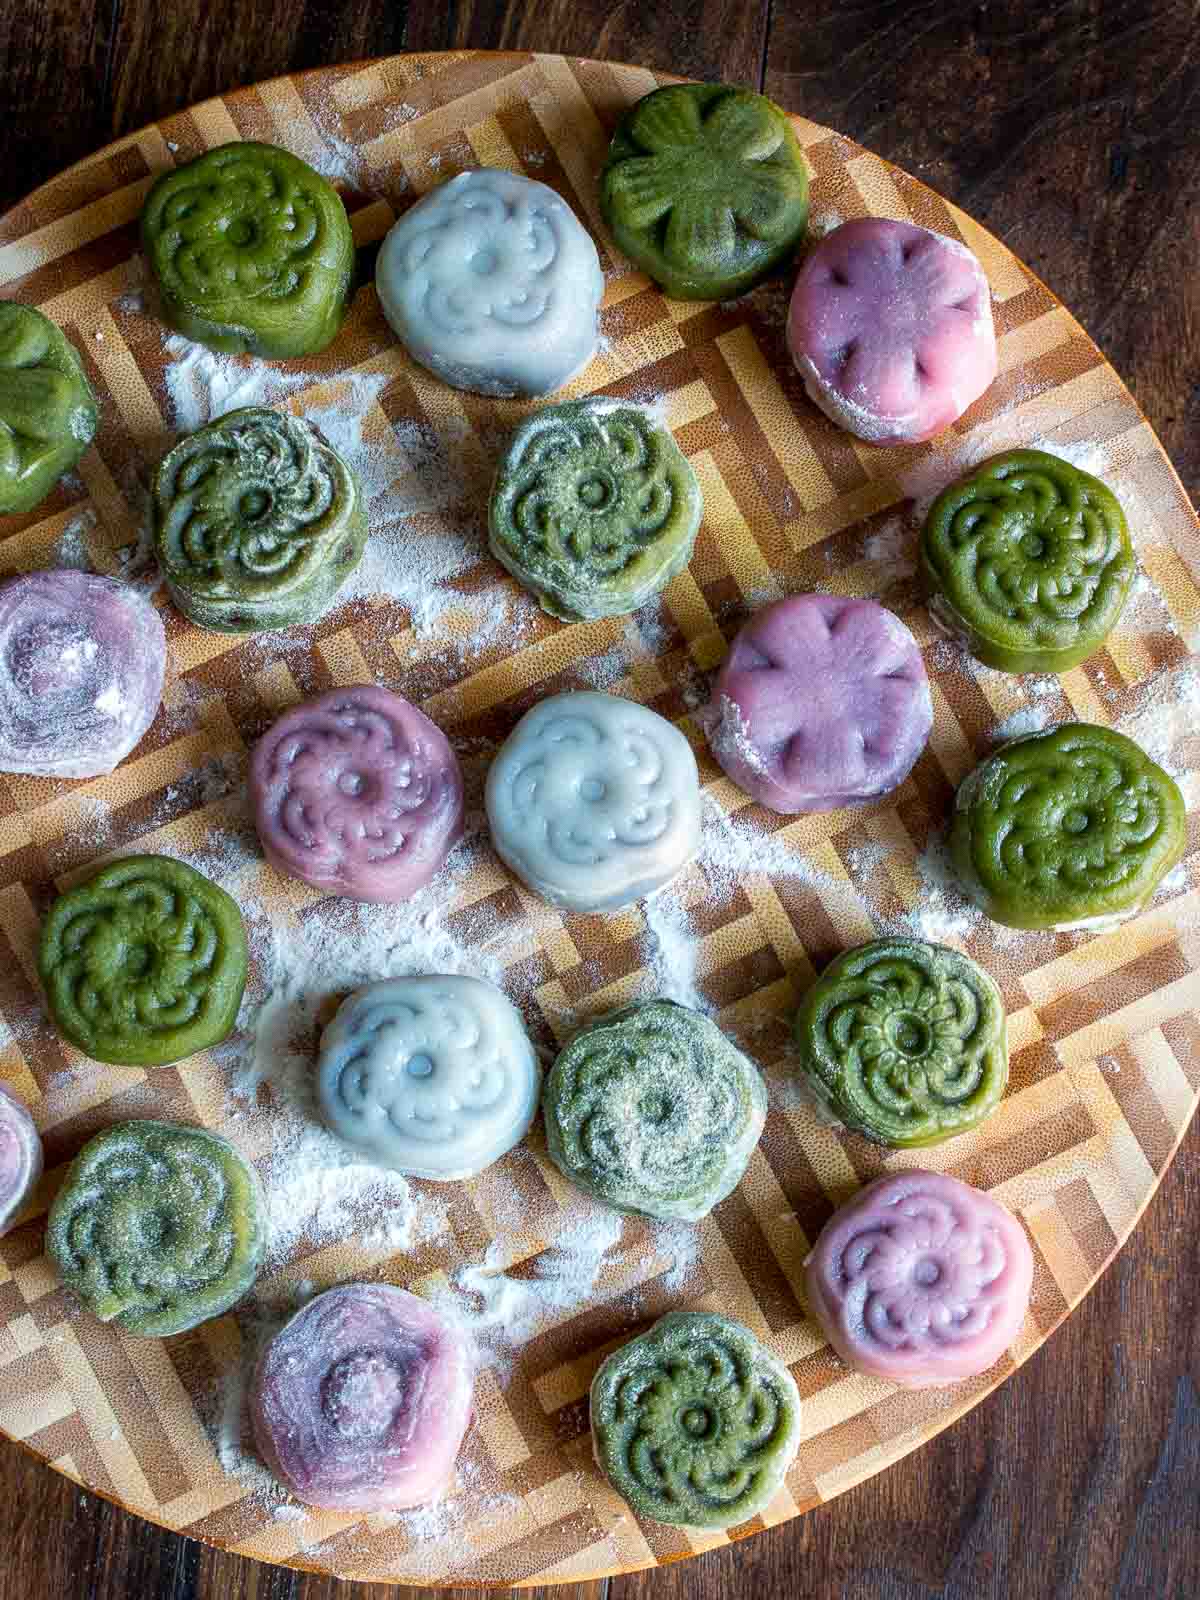 Displaying many prepared green, white and pink snow skin mooncakes laying on a wooden board. 